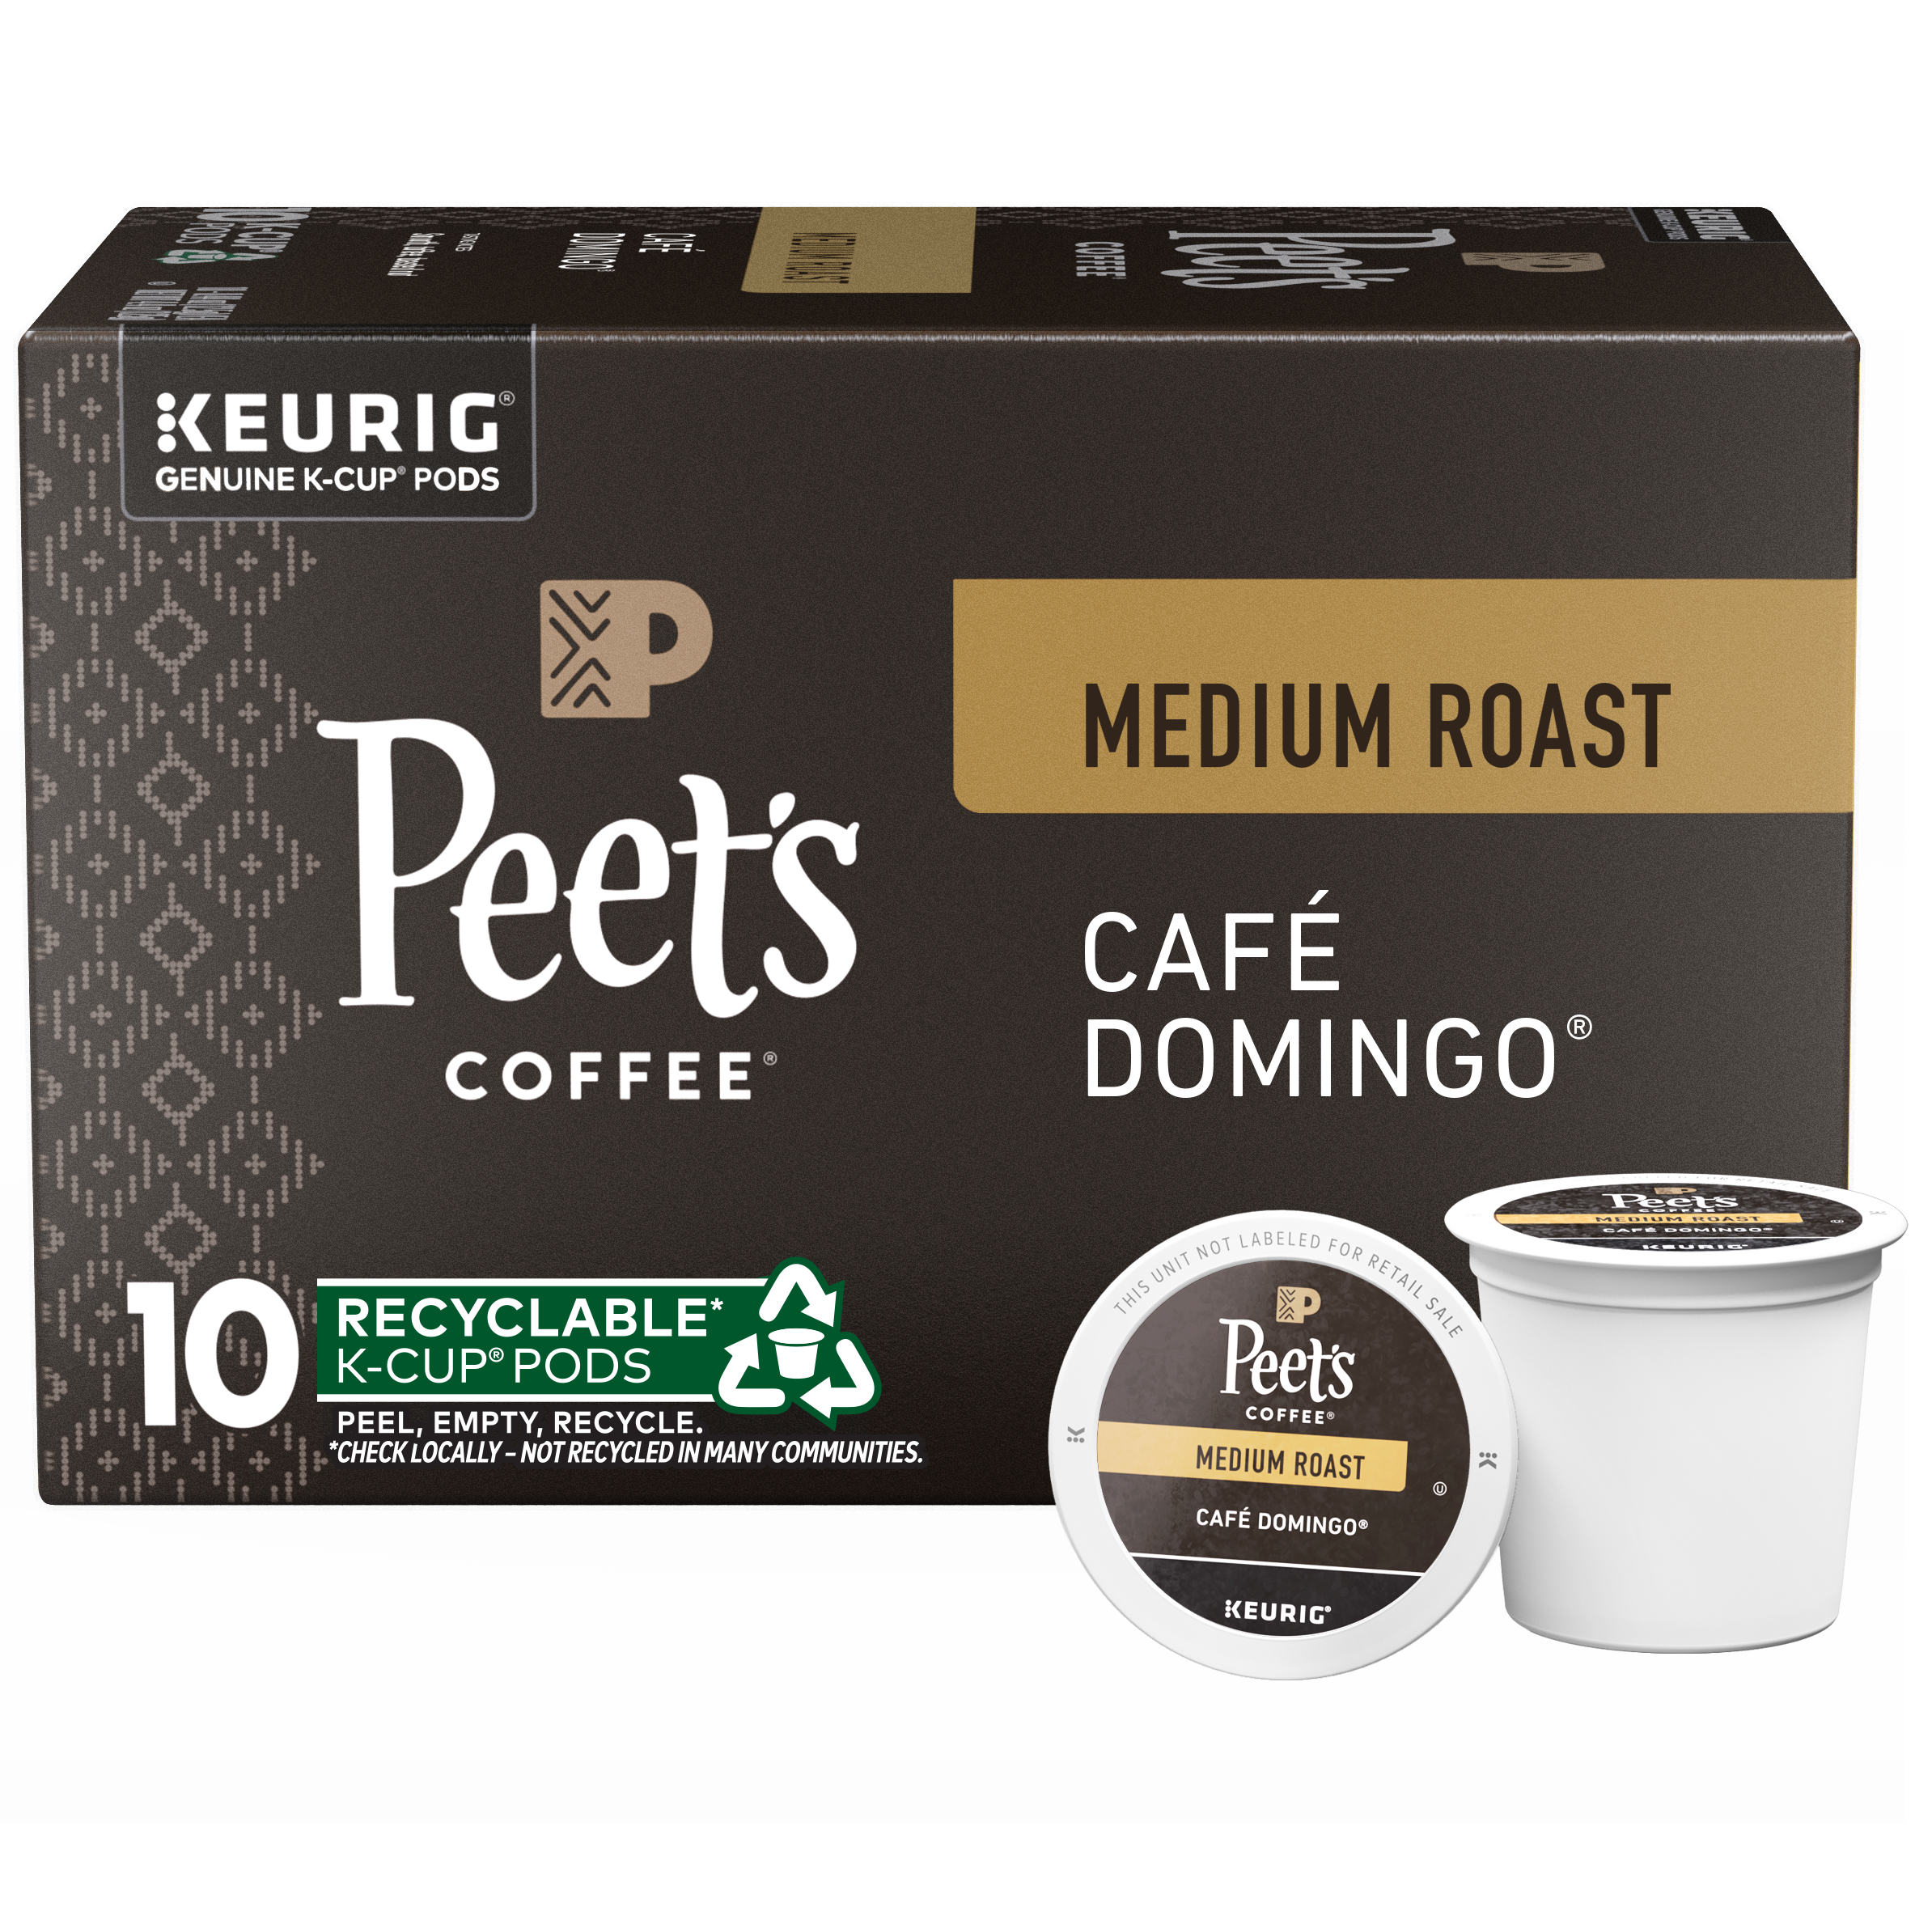 Saw this at the store today, brews k cups and Nespresso capsules